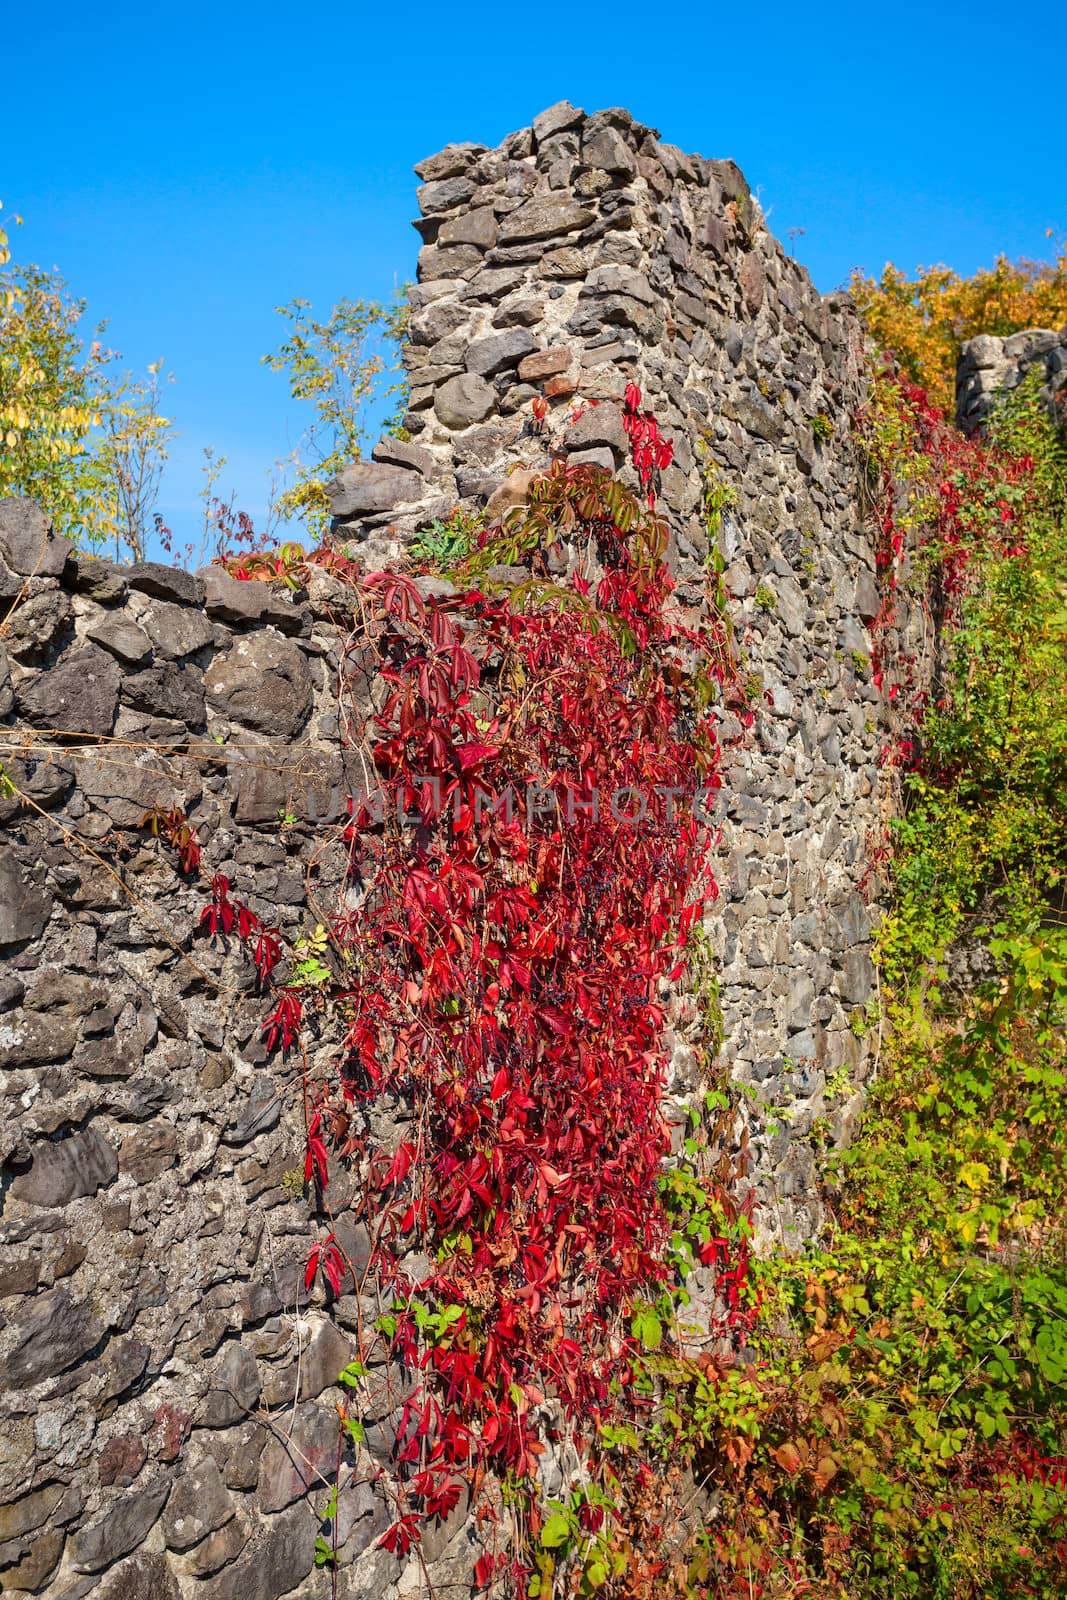 Nevitsky Castle. The wall of an old castle in early autumn